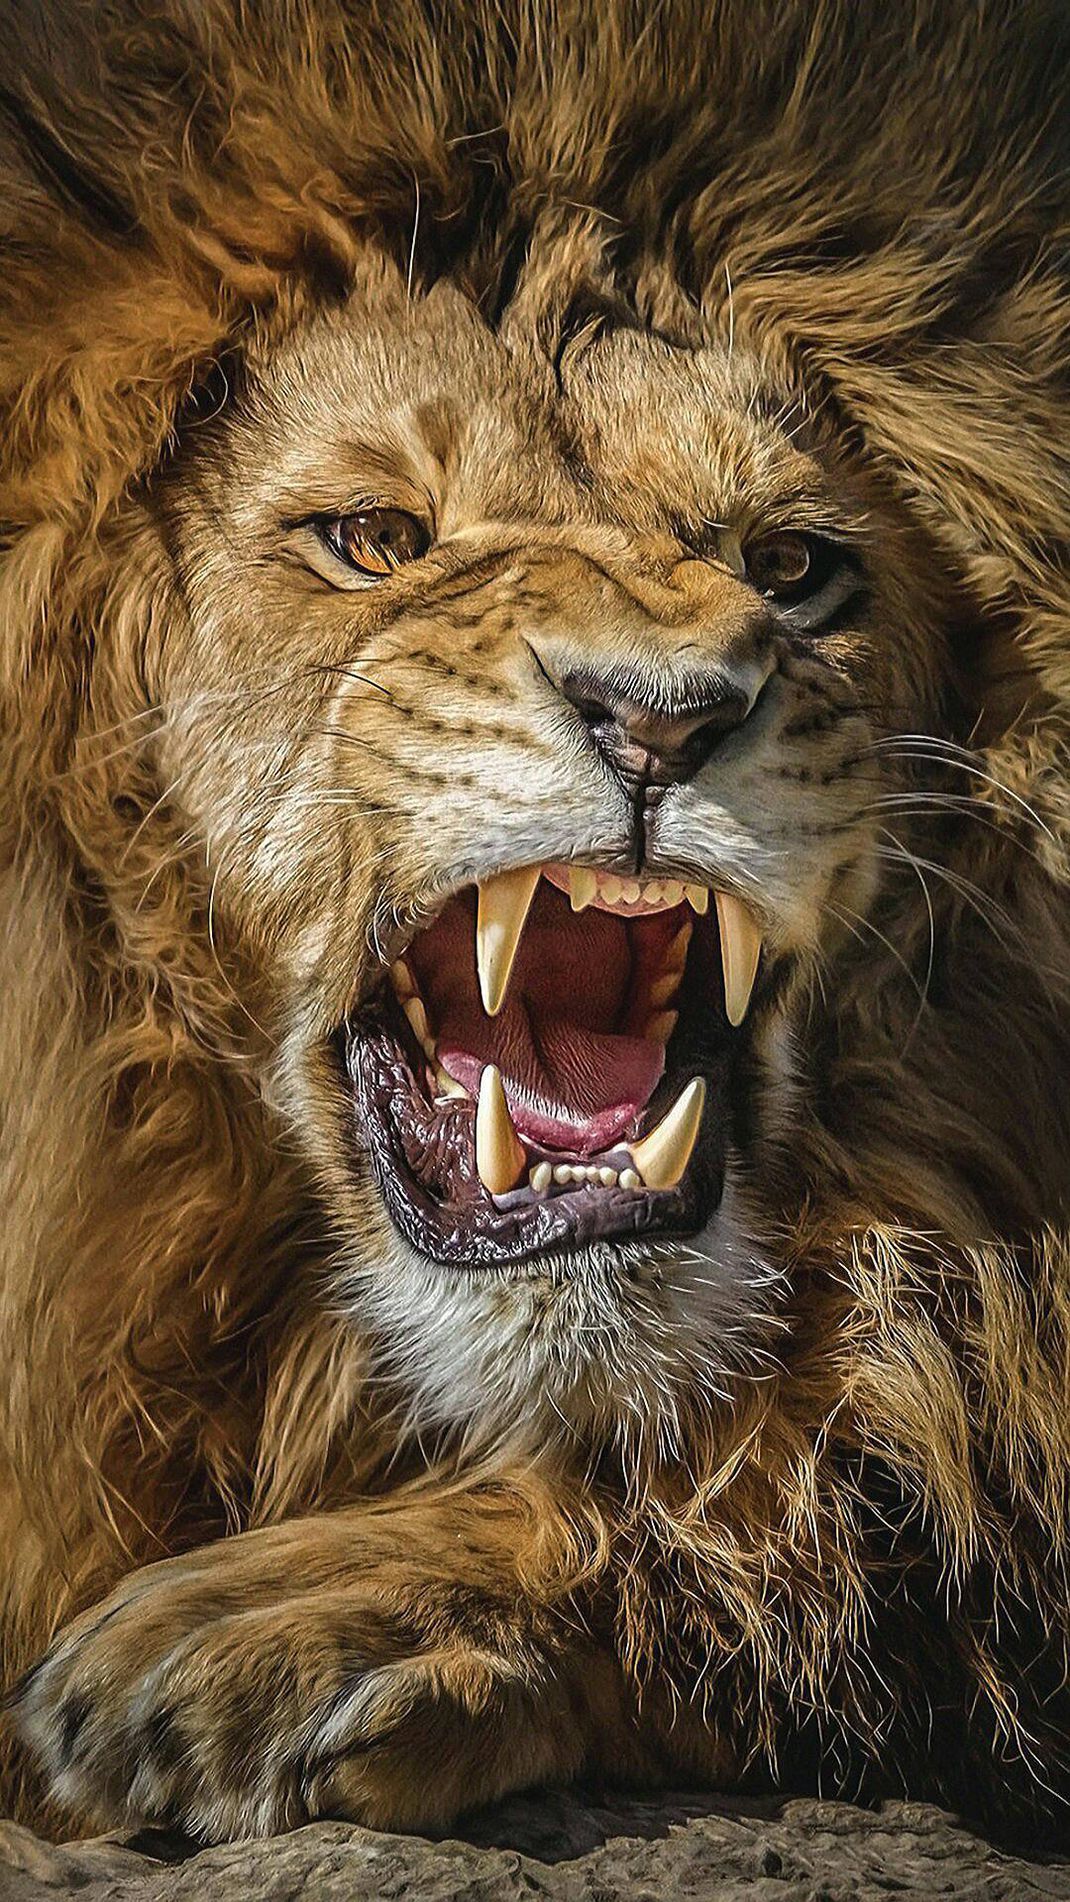 Great Lion Ultra HD Wallpaper For Andriod Download In Link For HD result. Lion picture, Lion photography, Lion wallpaper